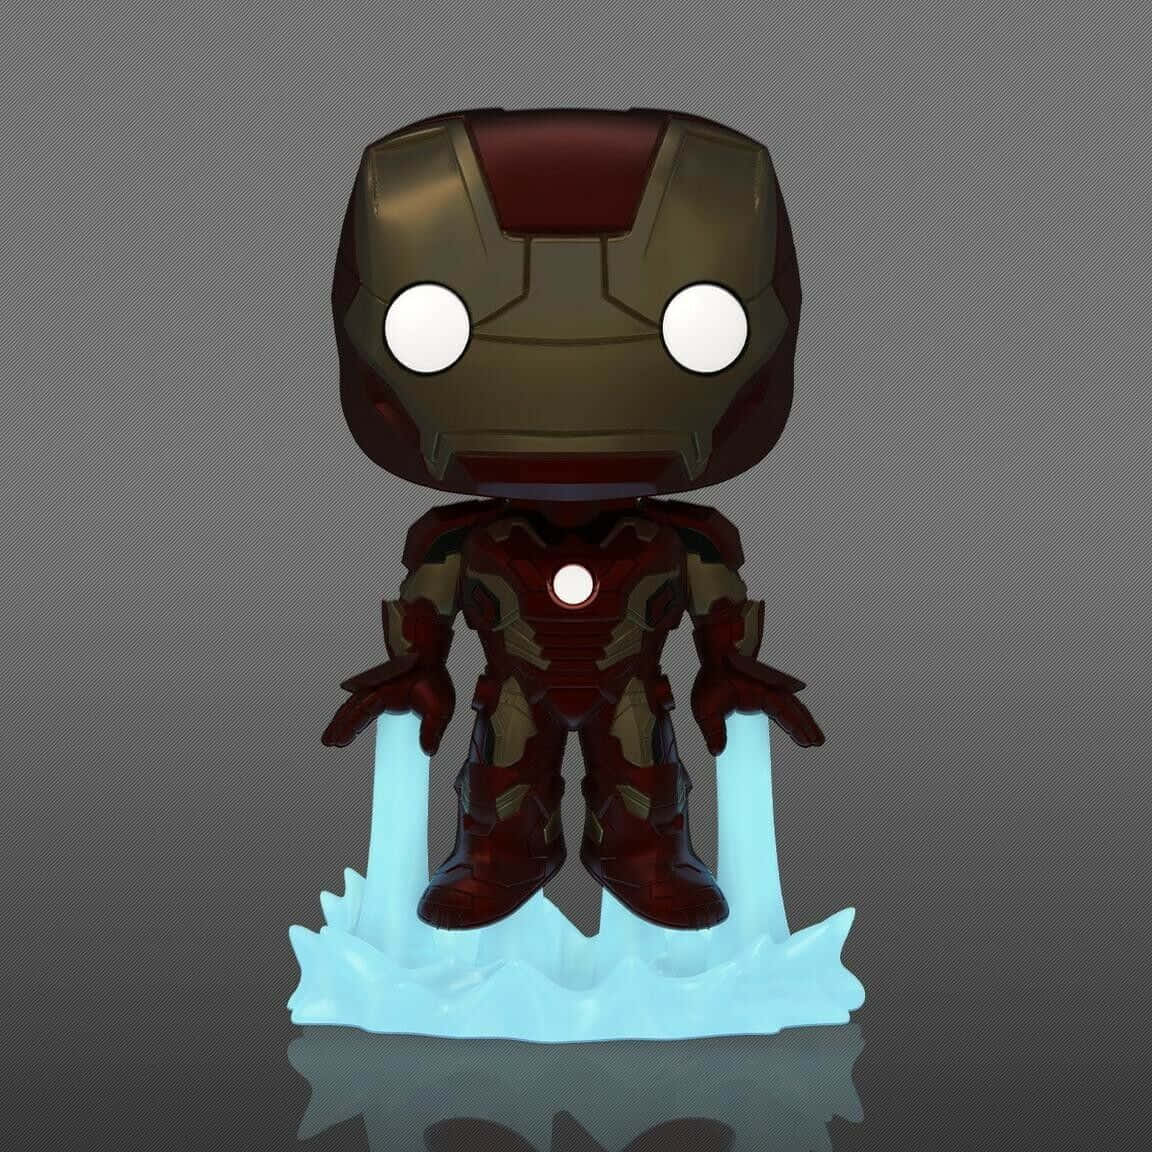 Image  Brightly Colored Iron Man Pop Figures Wallpaper